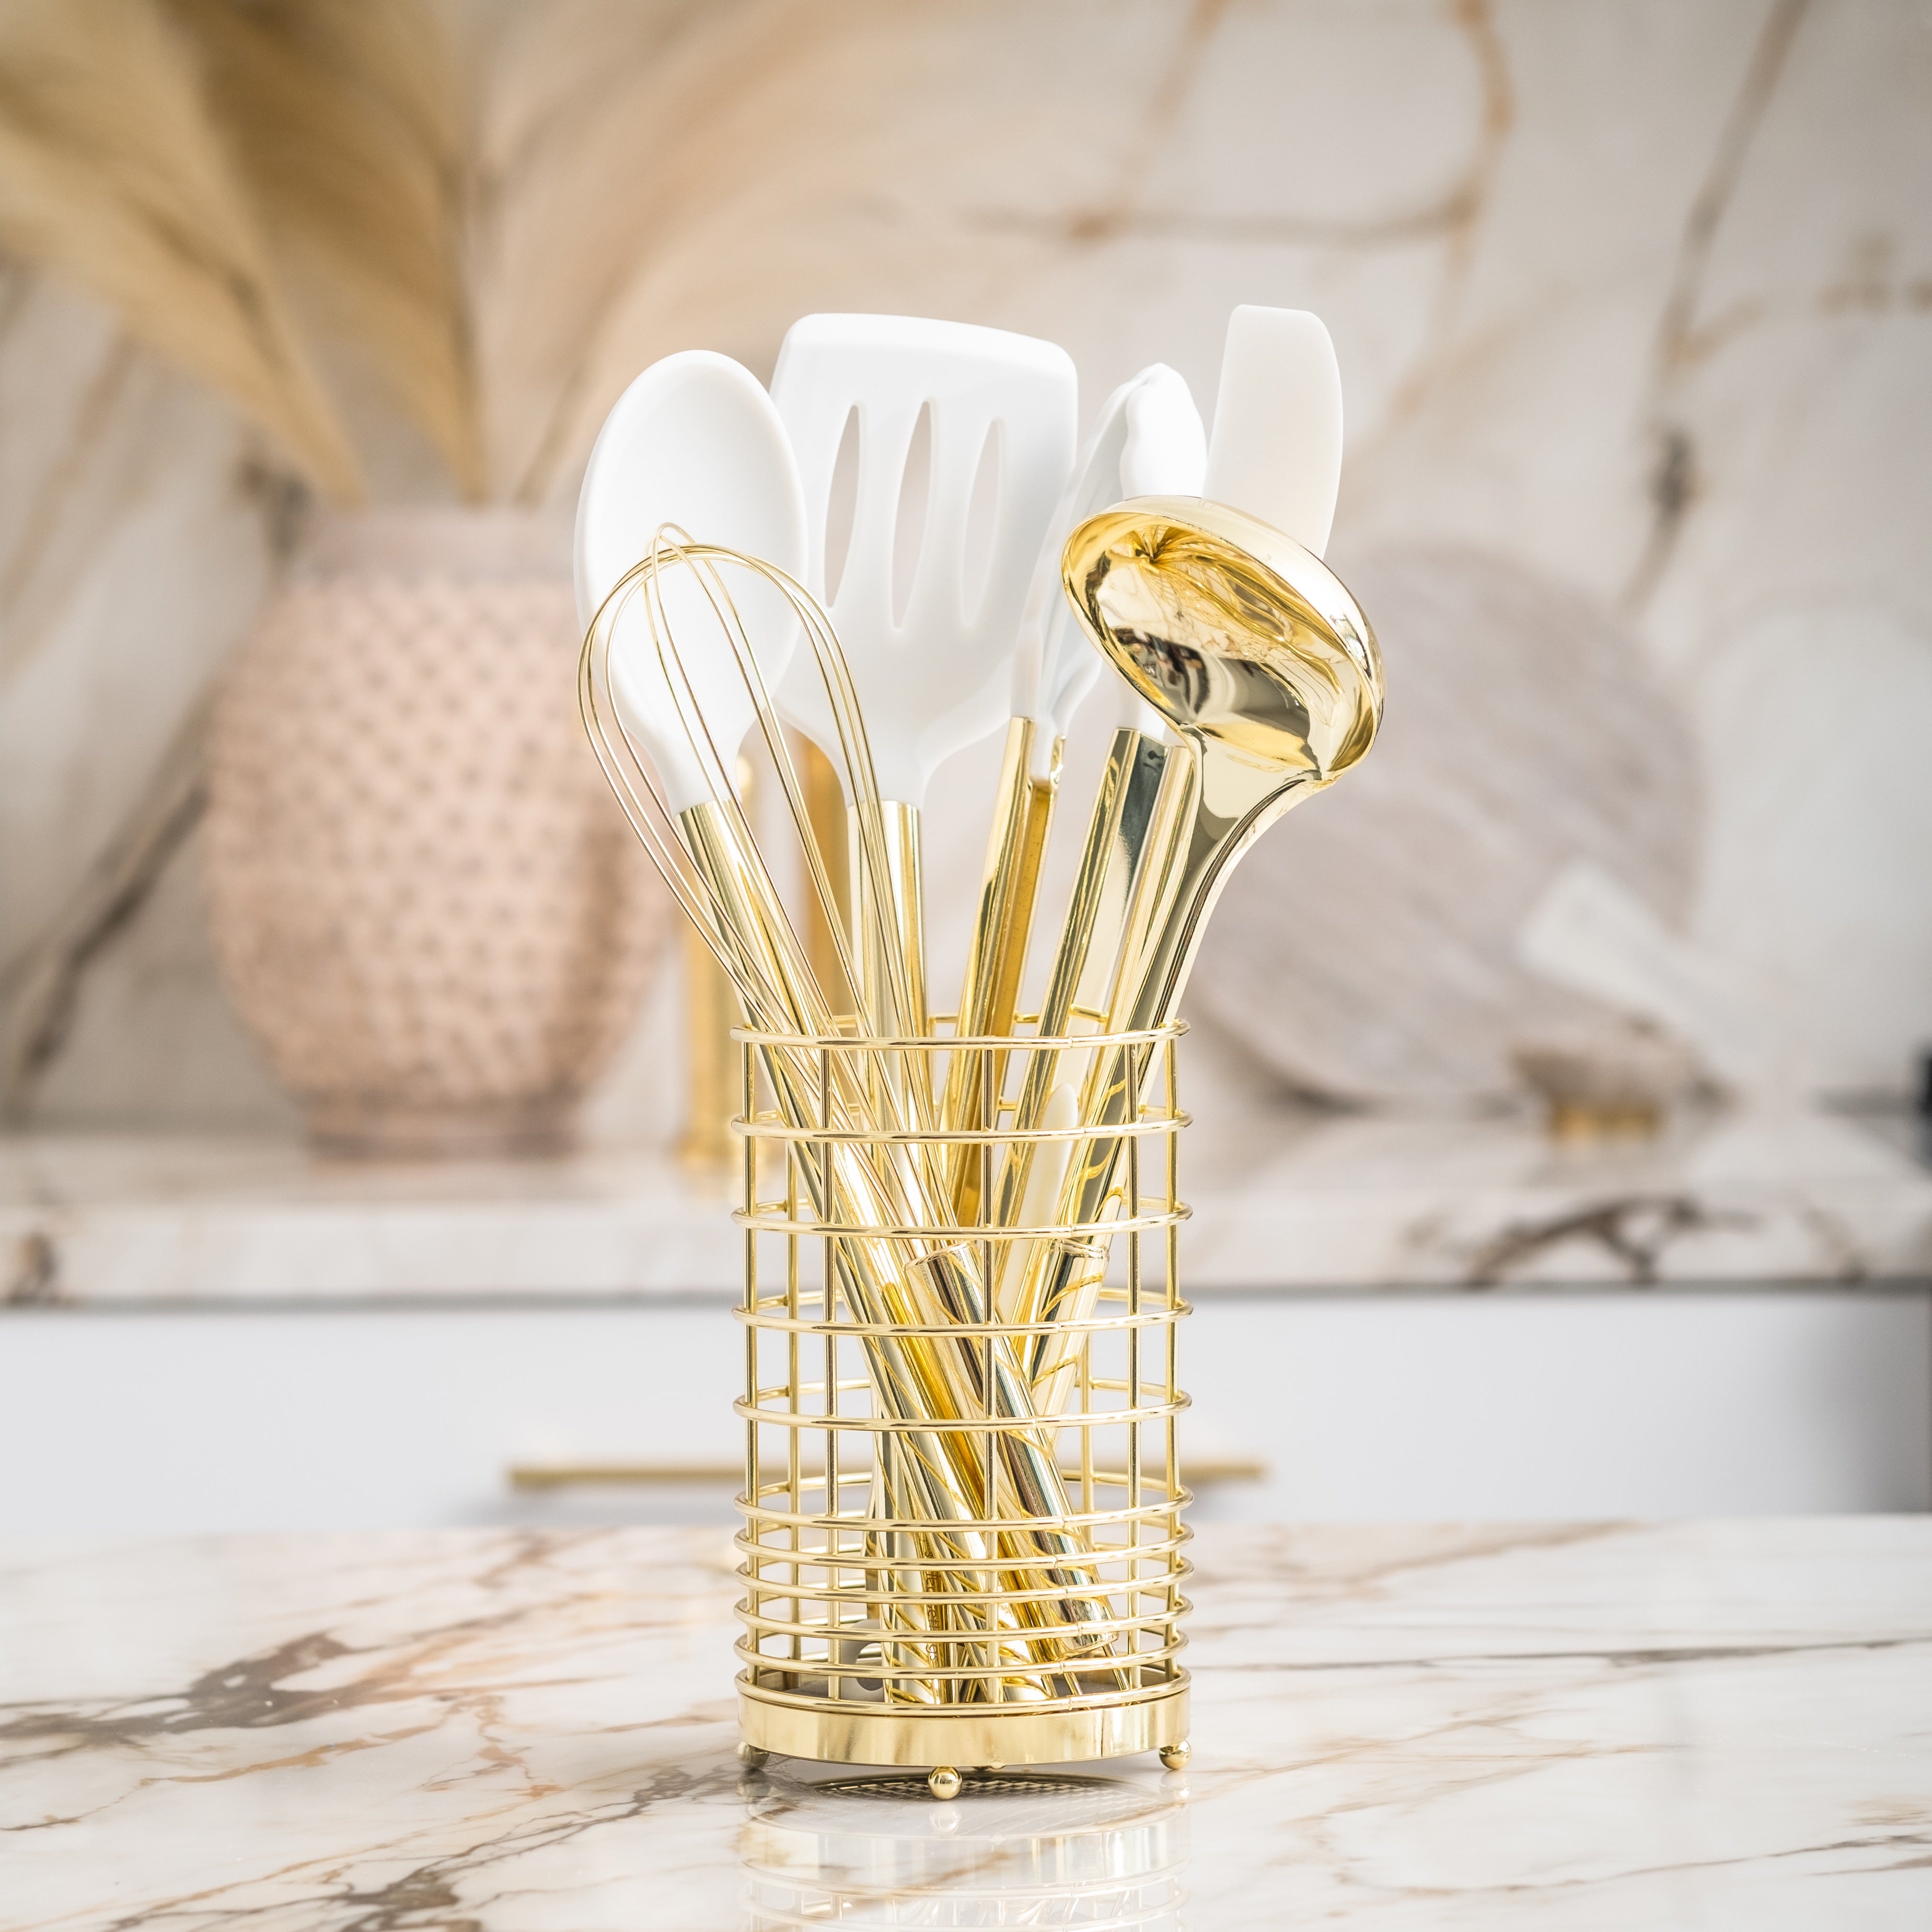 White and Light Gold Kitchen Utensils Set with Holder - Styled Settings